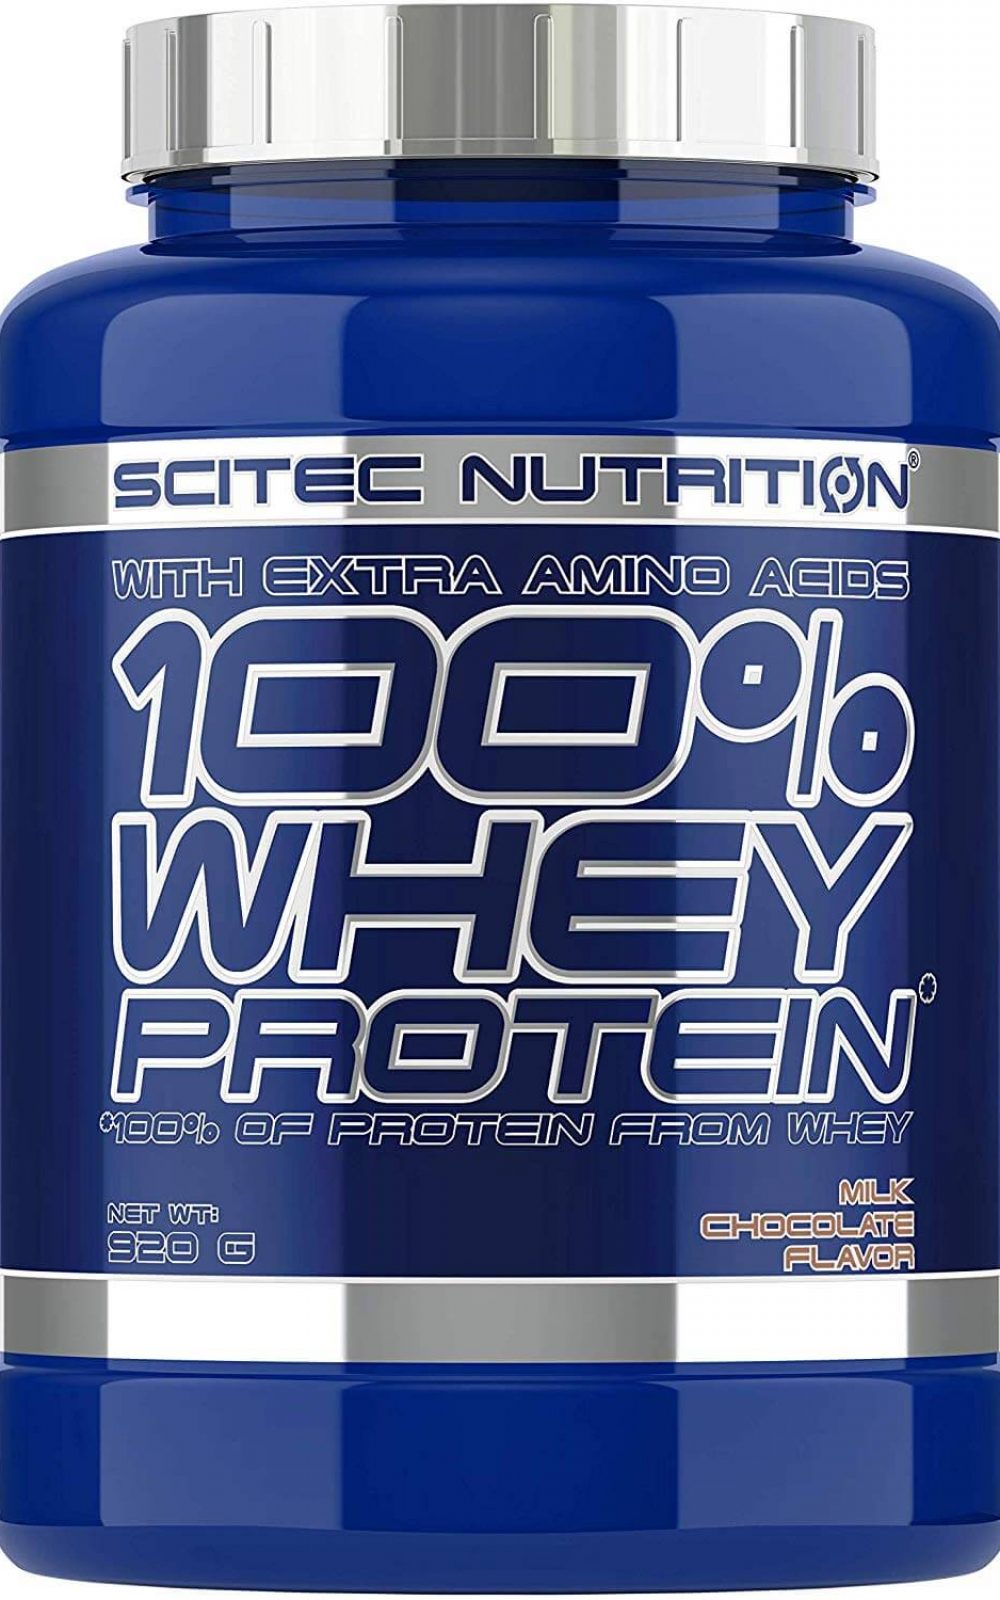 Scitec Nutrition Whey Protein Proteína, Chocolate con Leche - 920 g